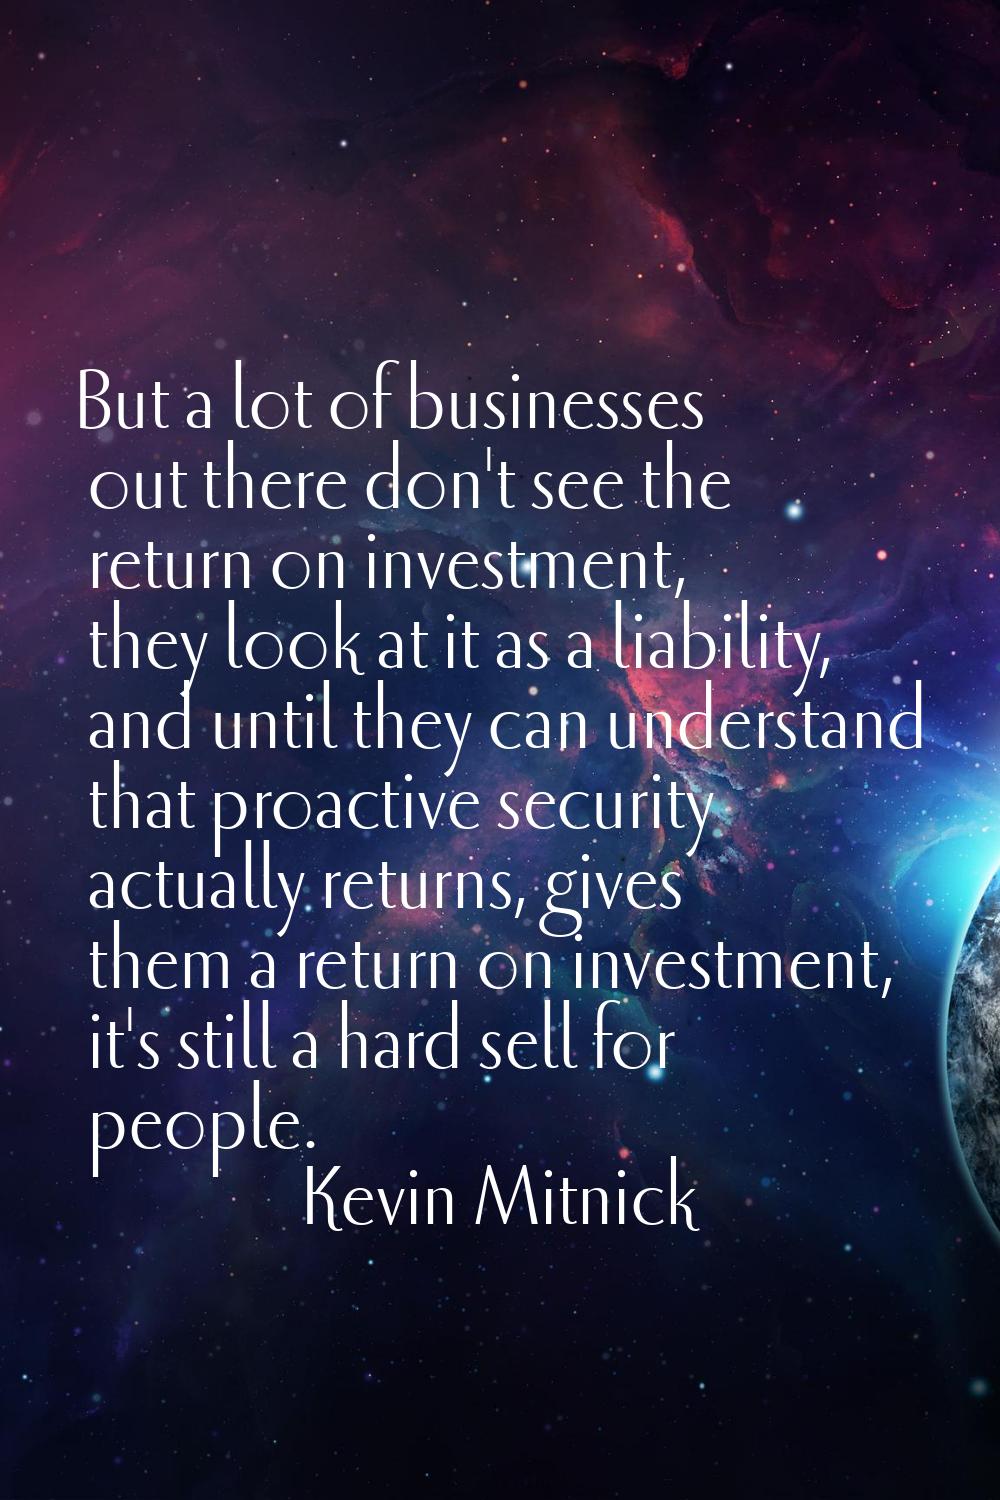 But a lot of businesses out there don't see the return on investment, they look at it as a liabilit